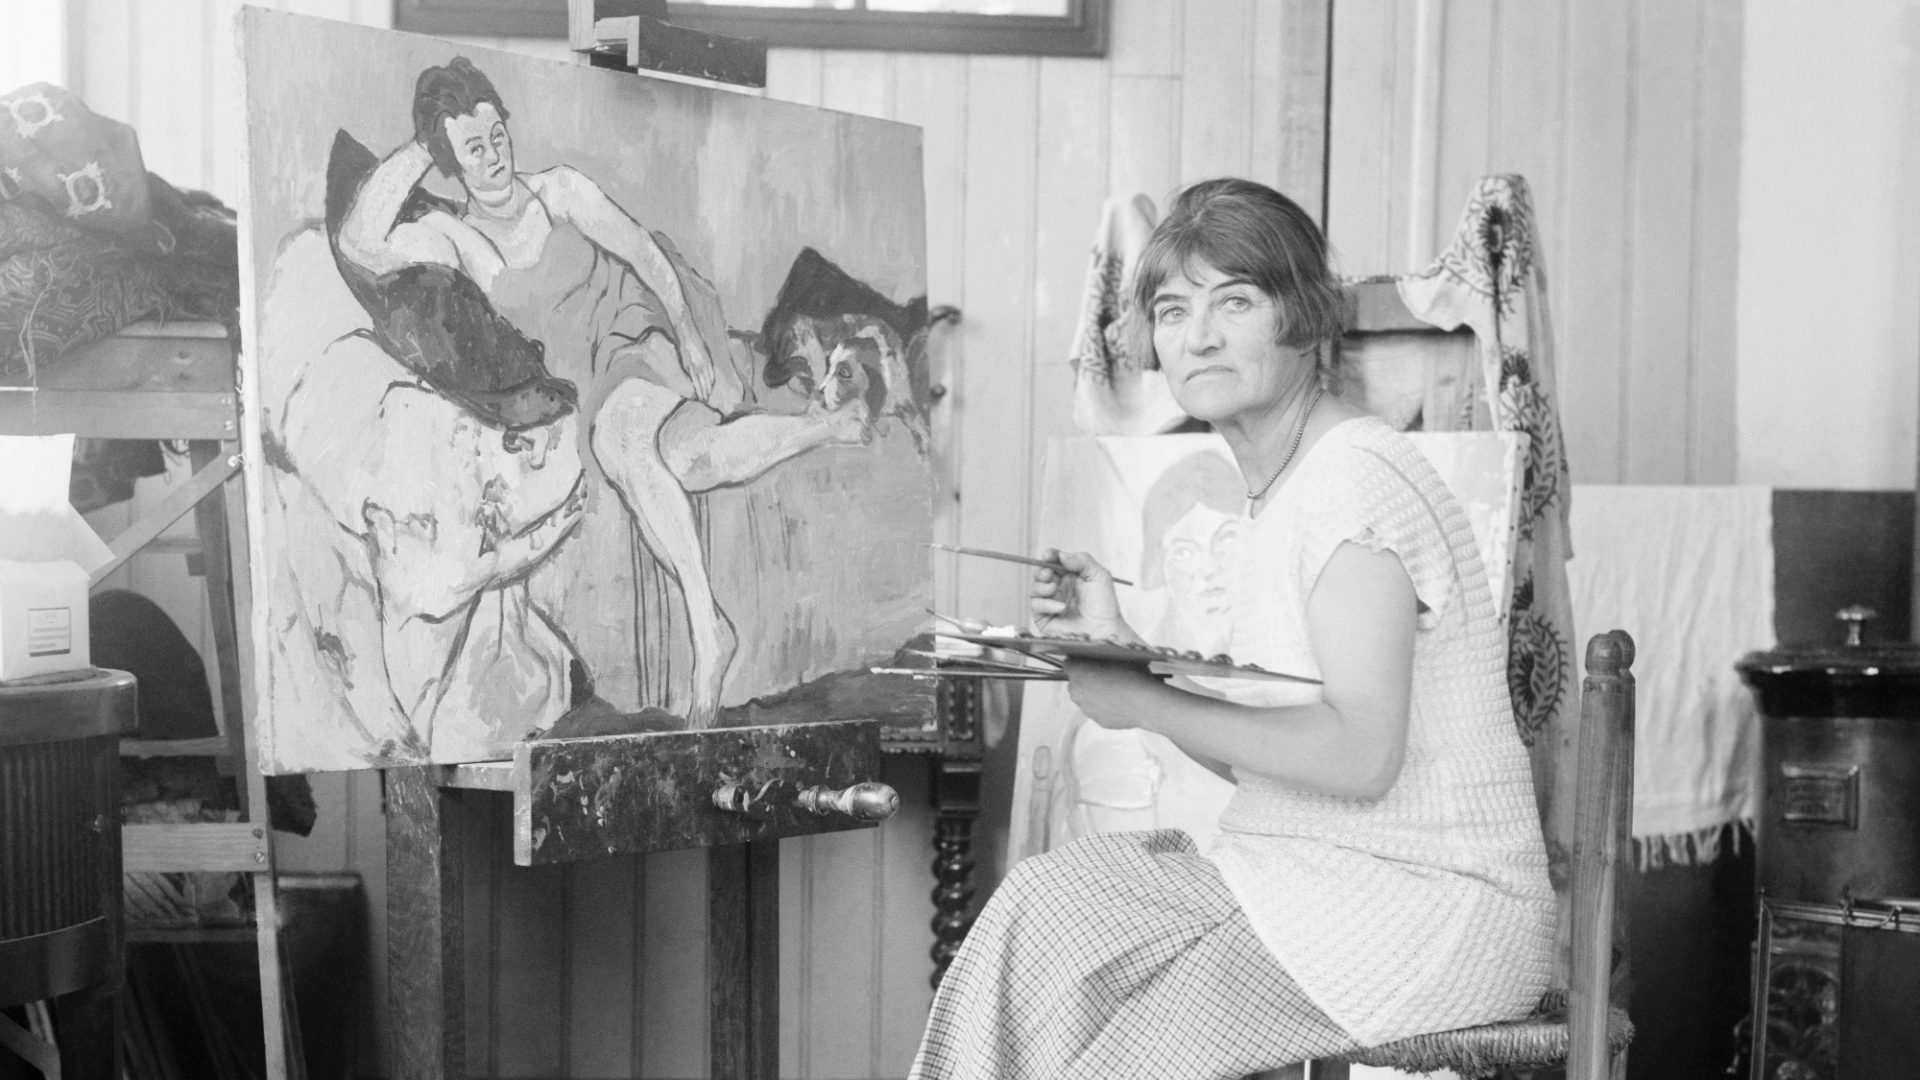 Suzanne Valadon’s paintings often subverted the traditional reclining nude. Photo: Bettmann/Getty